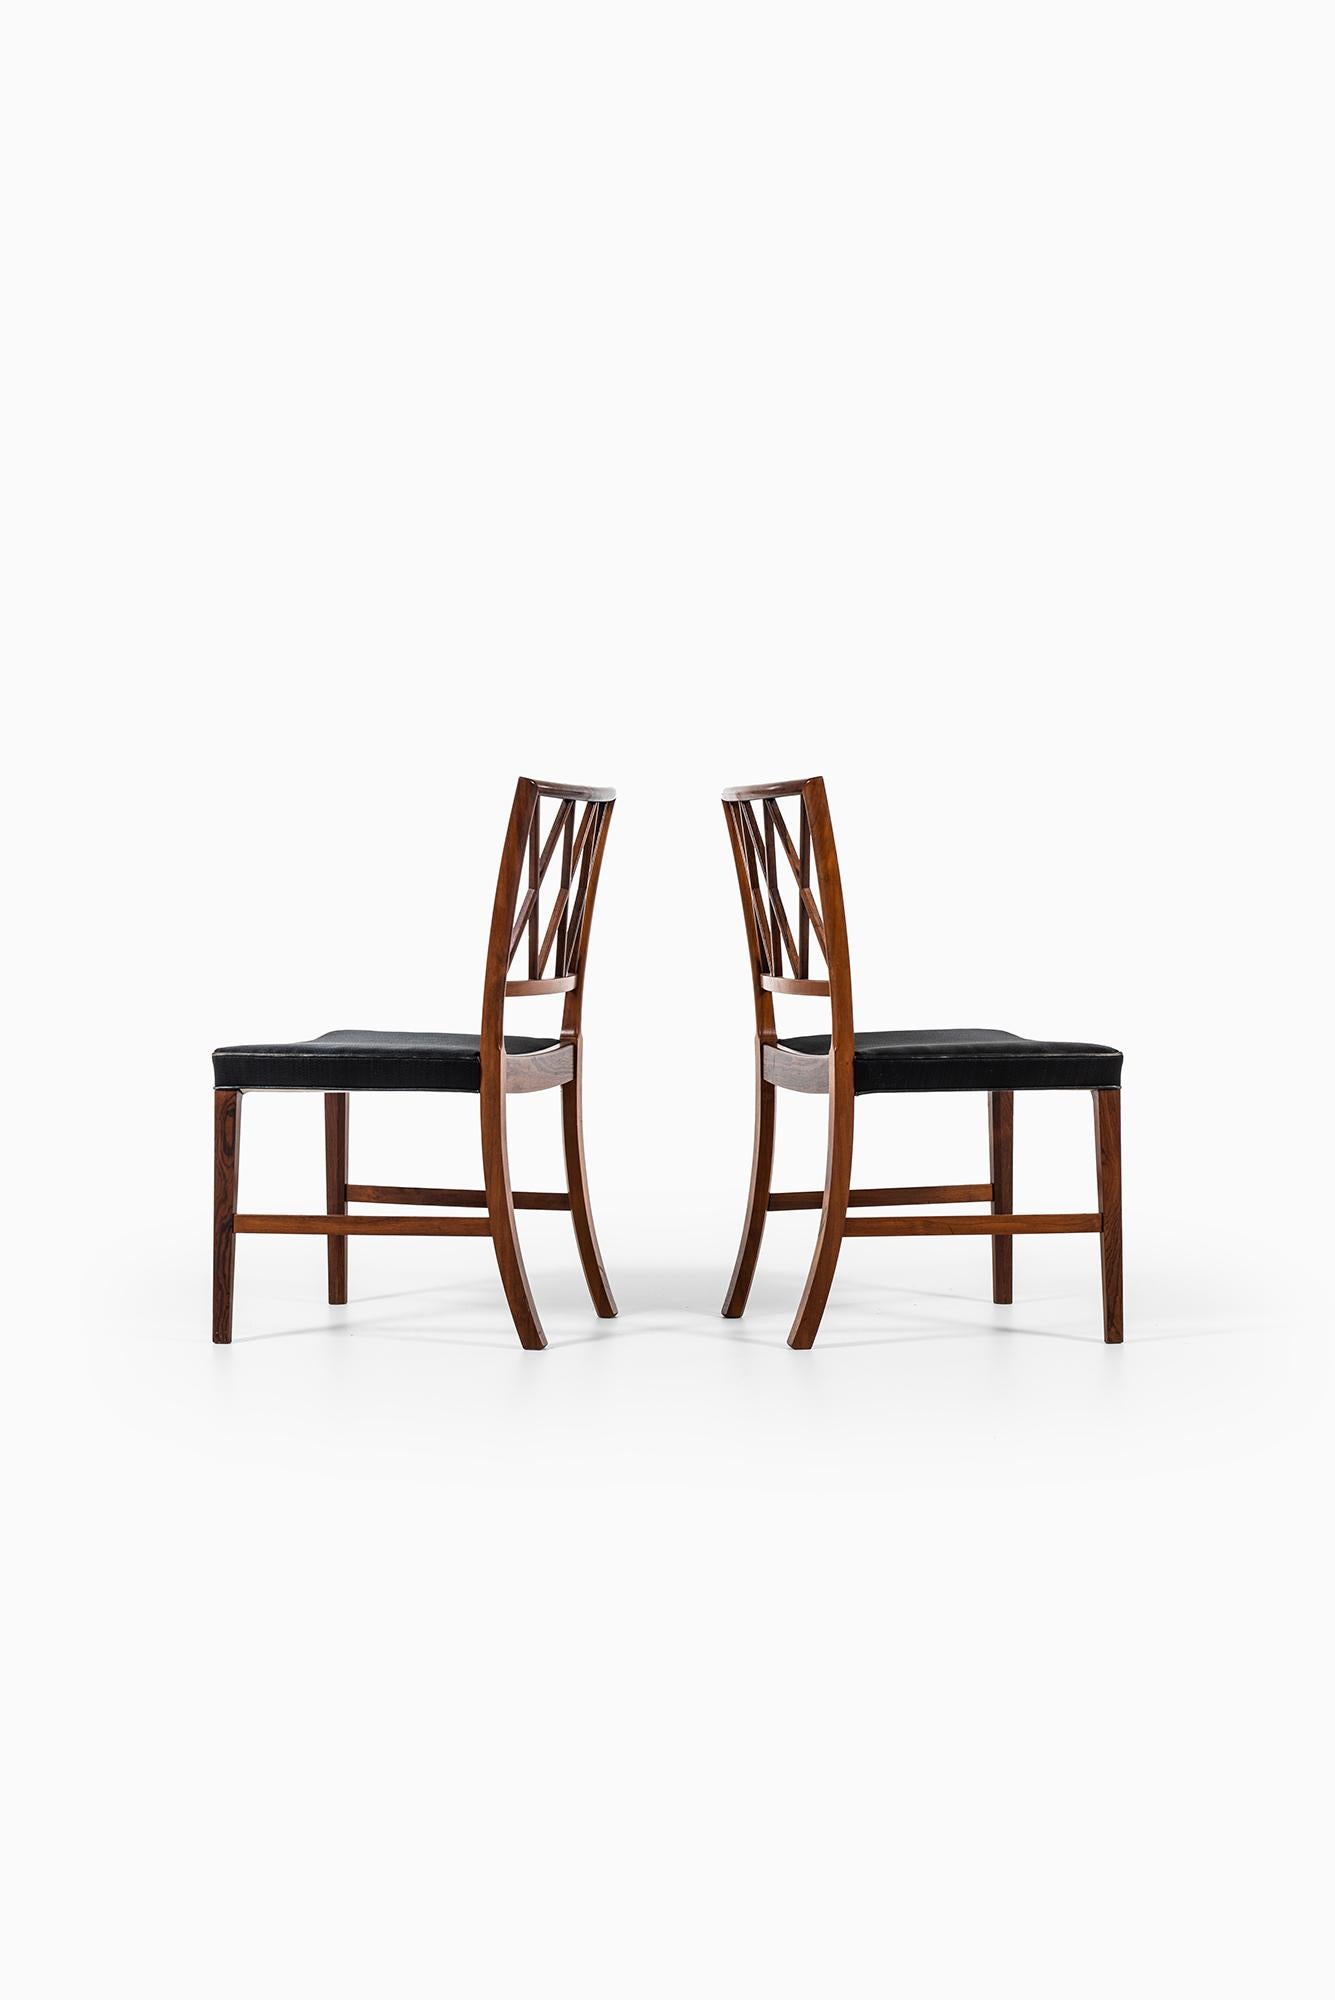 Danish Ole Wanscher Dining Chairs by Cabinetmaker A.J Iversen in Denmark